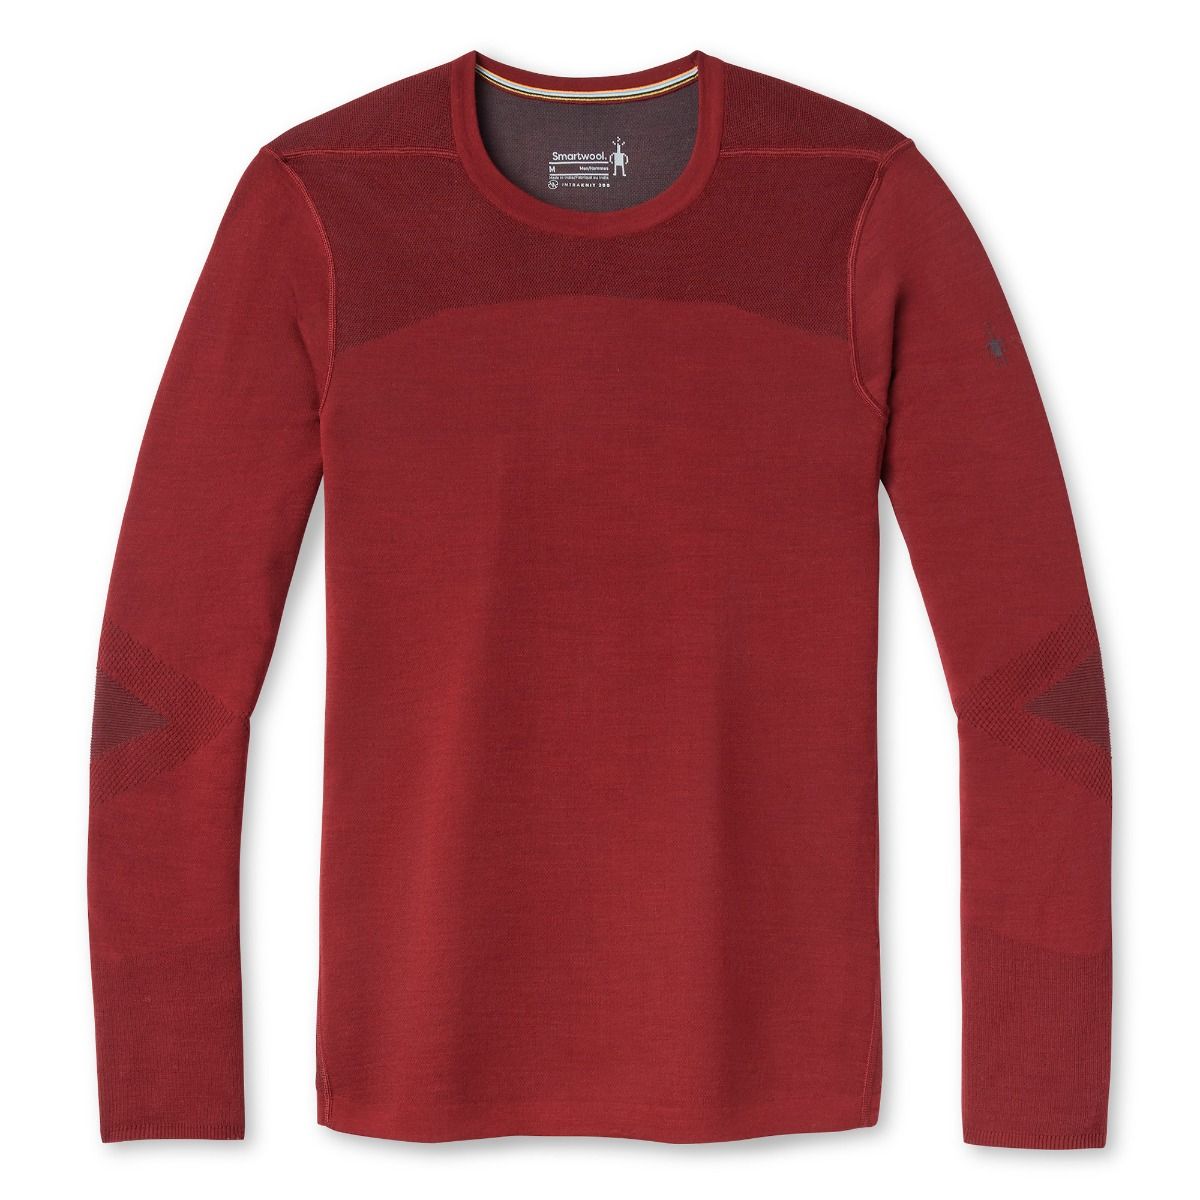 Smartwool Intraknit Thermal Merino 200 Base Layer Pattern Crew - Womens, FREE SHIPPING in Canada